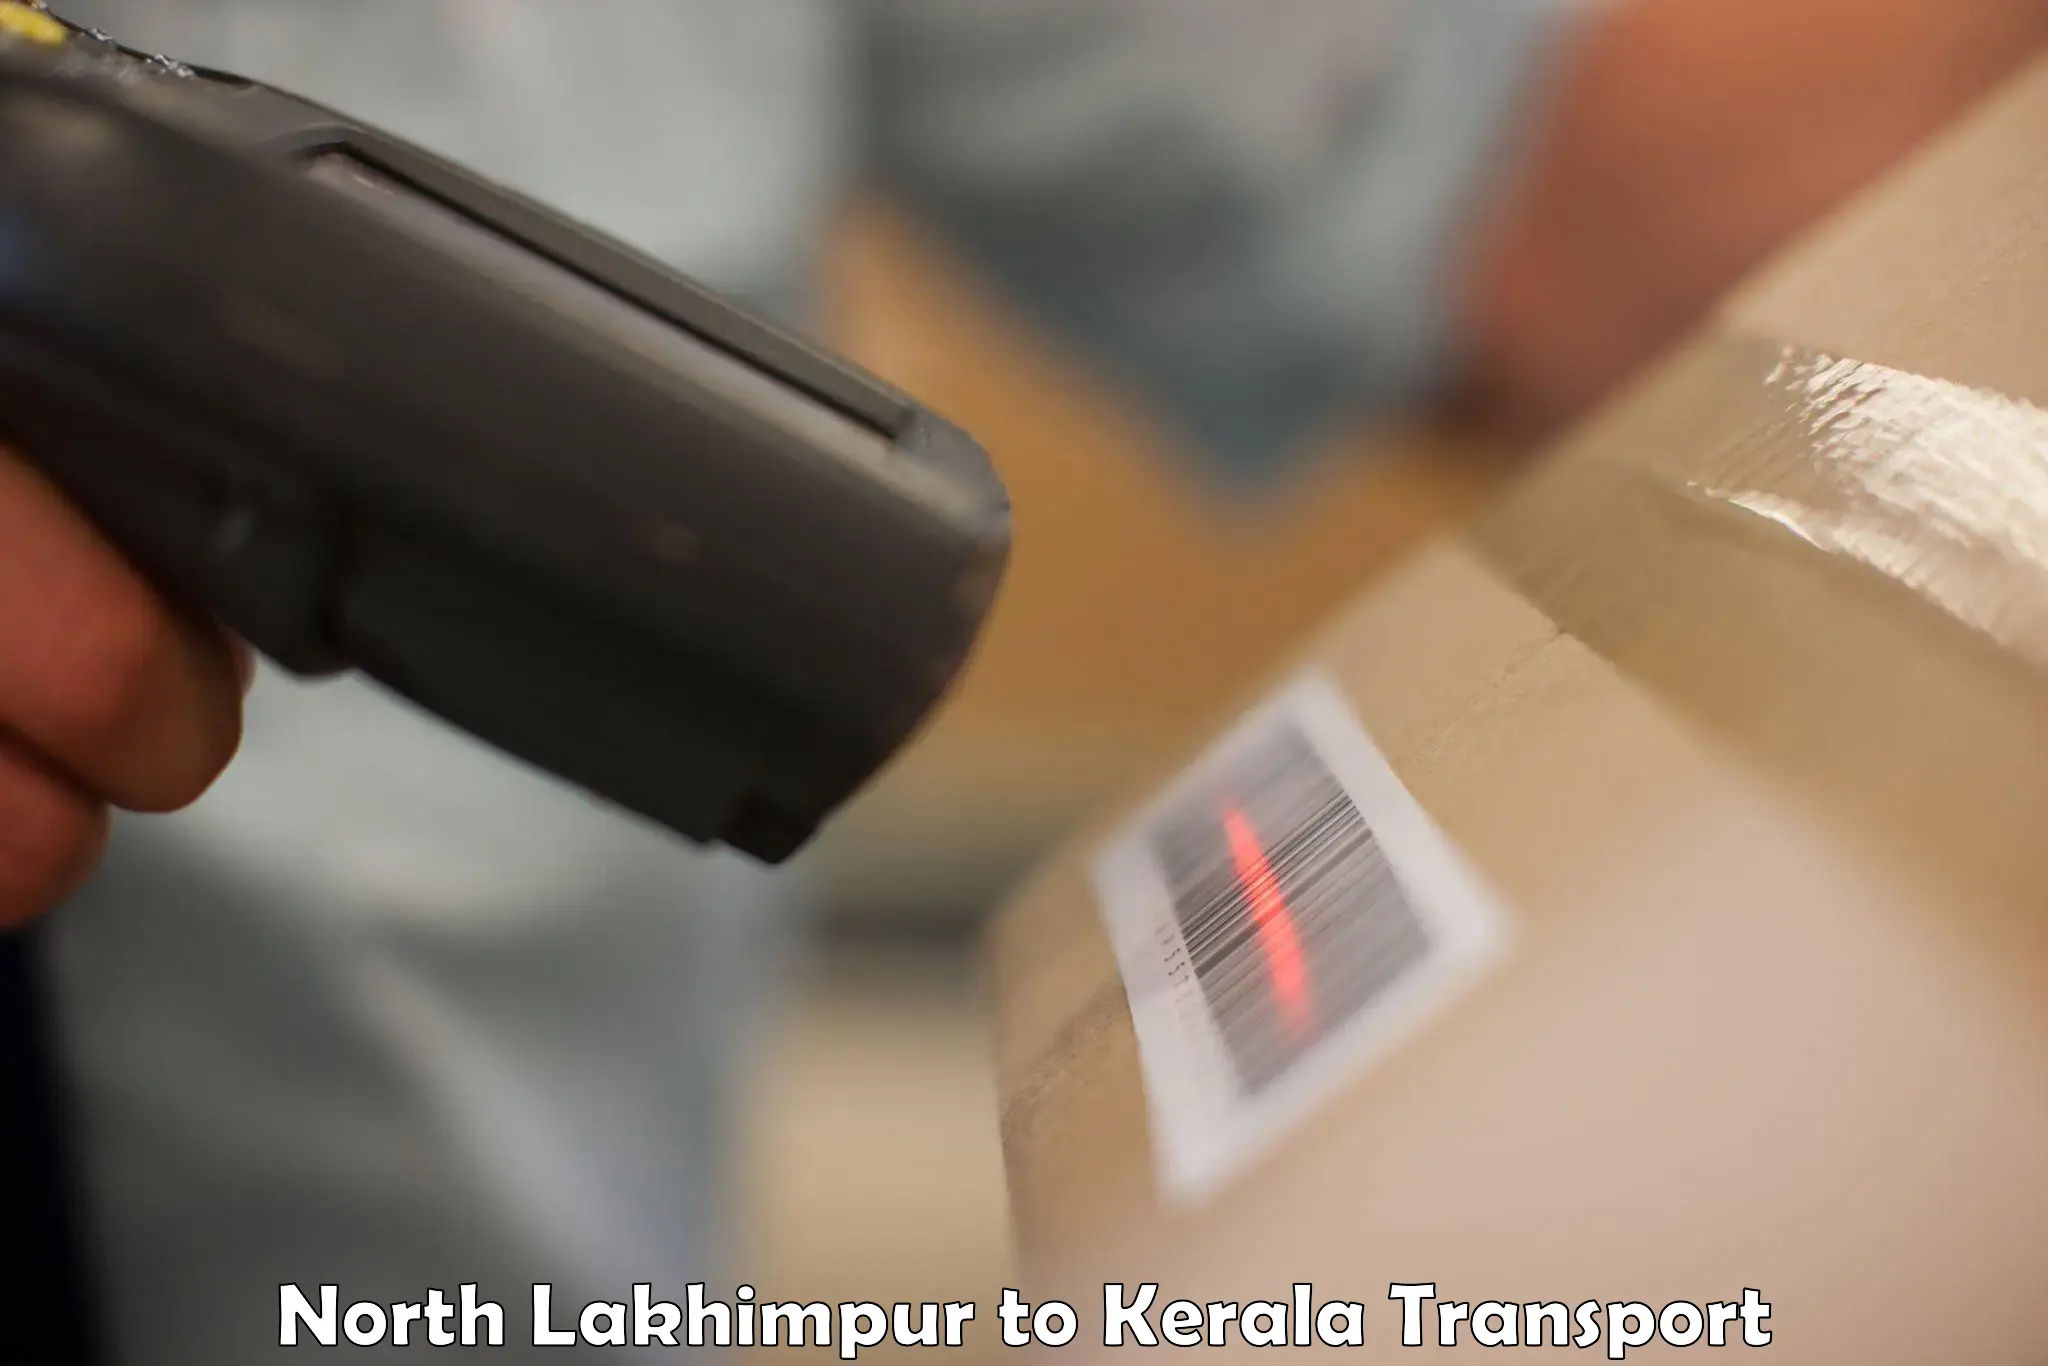 Commercial transport service North Lakhimpur to Koothattukulam